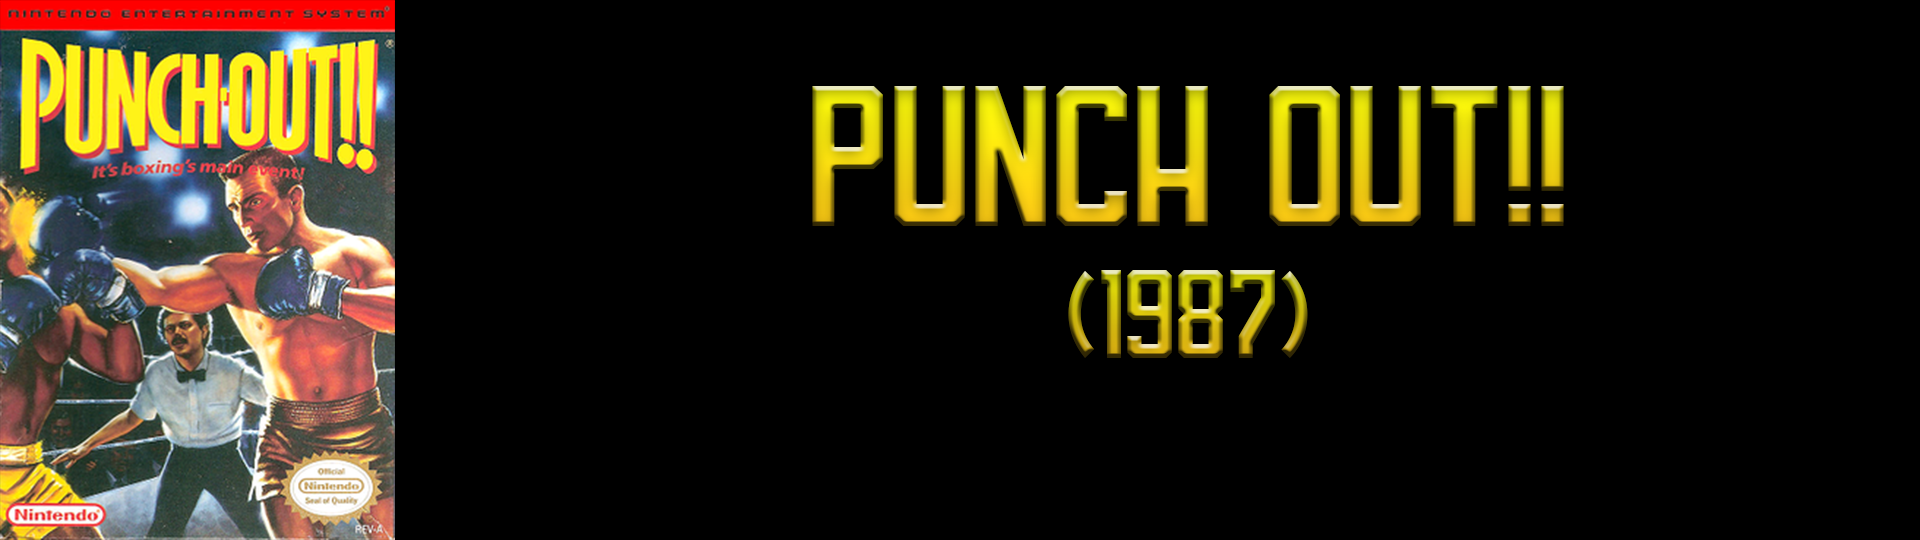 Punch-Out!